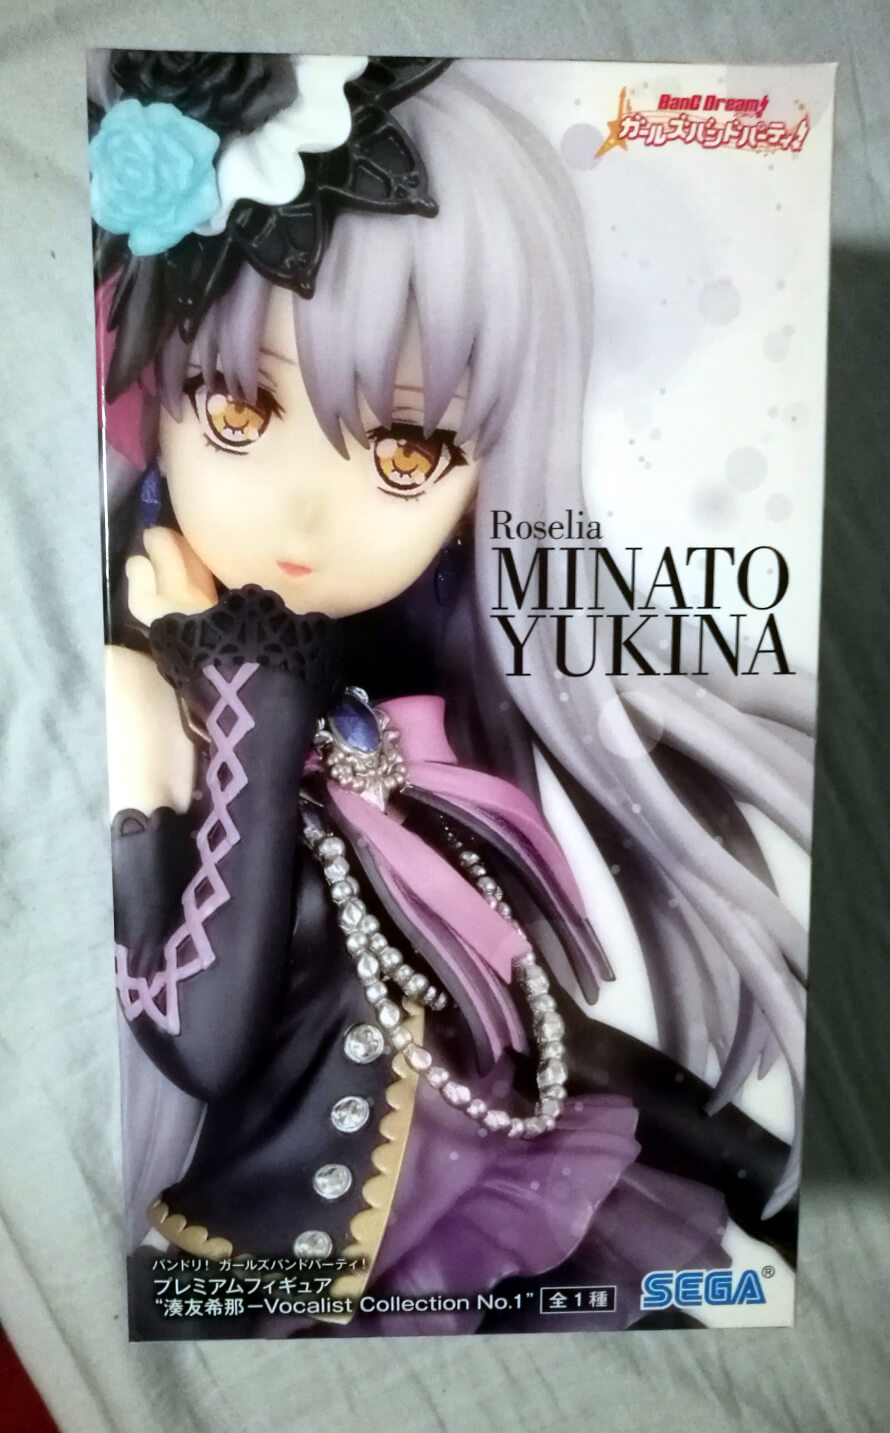   my Yukina figure arrived today!! best girl literally came home!!!...